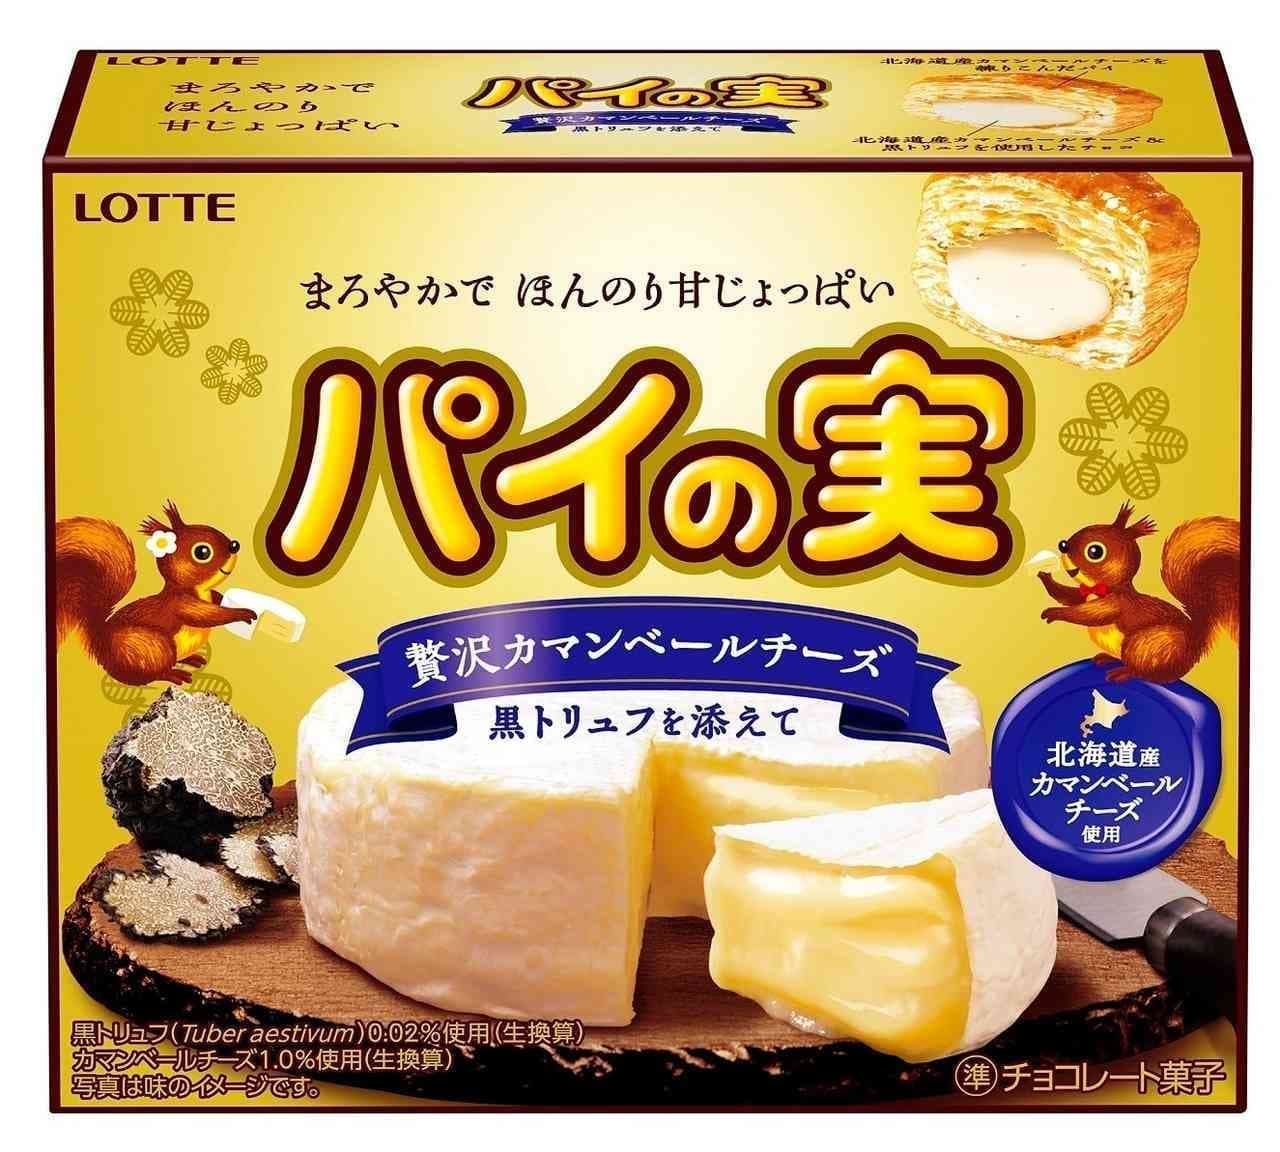 Lotte "Pie Nuts [Luxury Camembert Cheese with Black Truffle